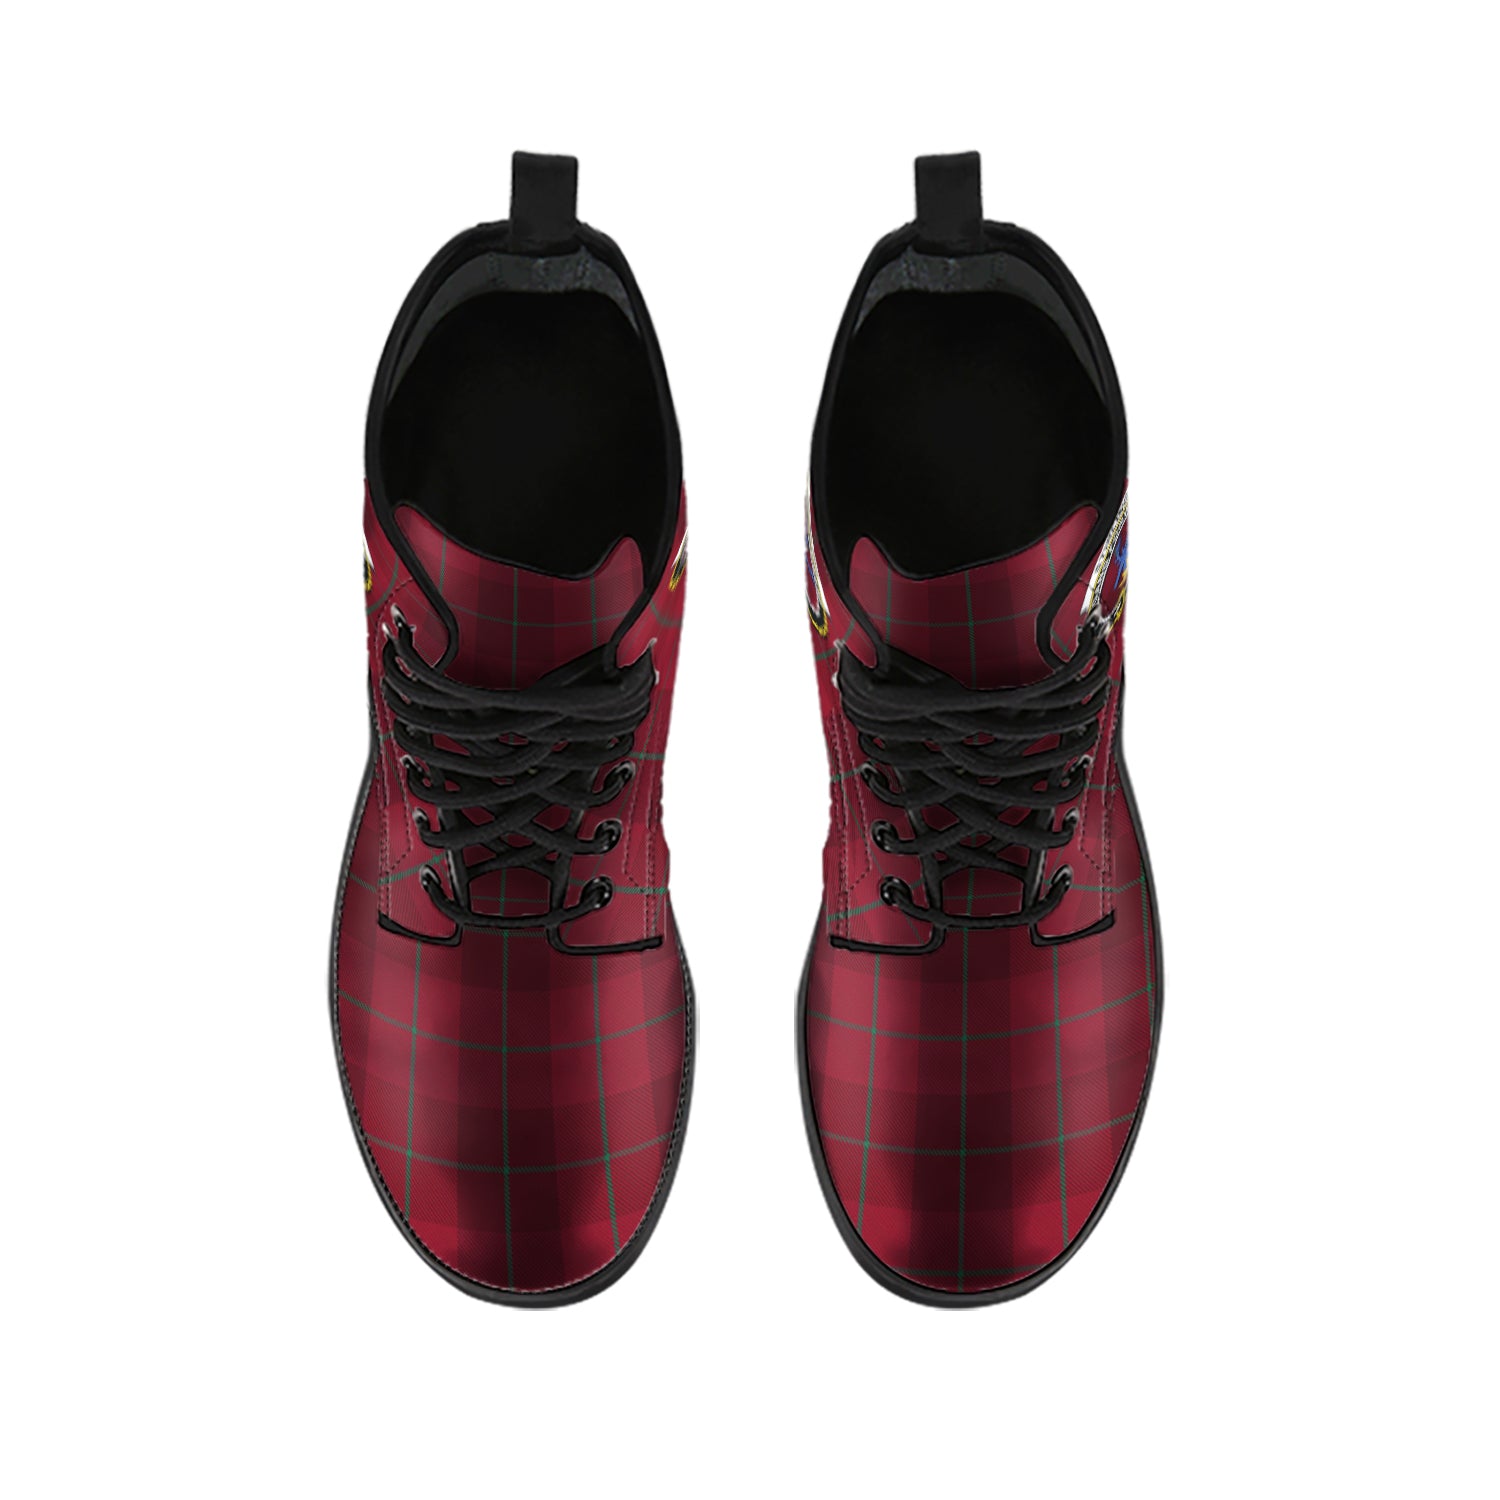 stirling-of-keir-tartan-leather-boots-with-family-crest